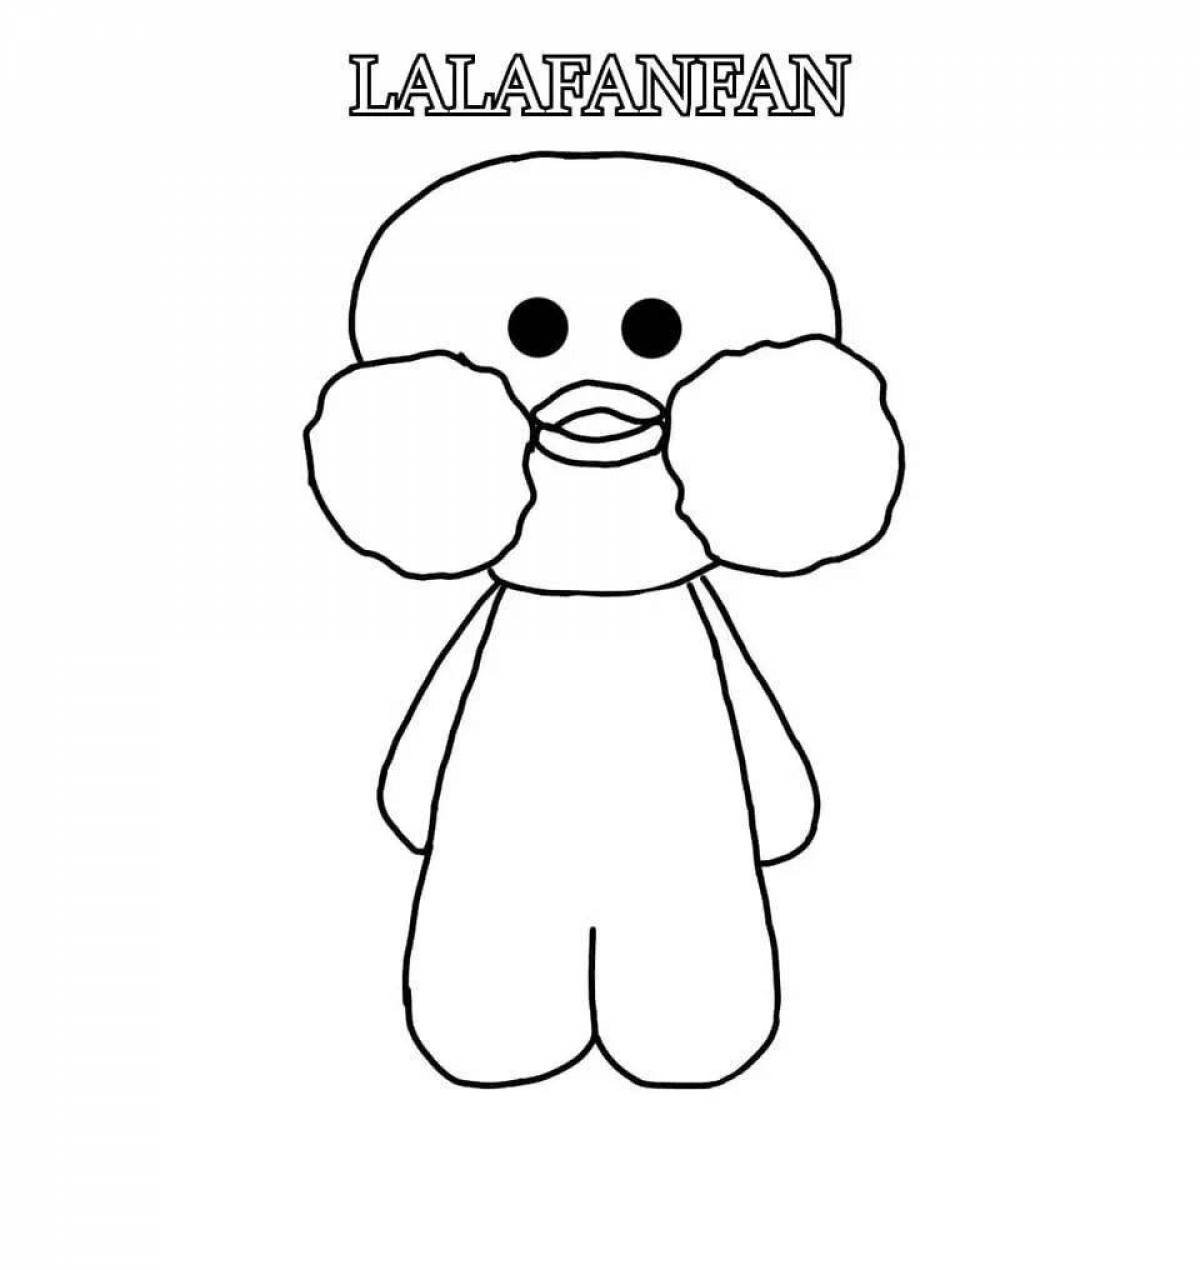 Lalafanfan's bright drawing of a duck